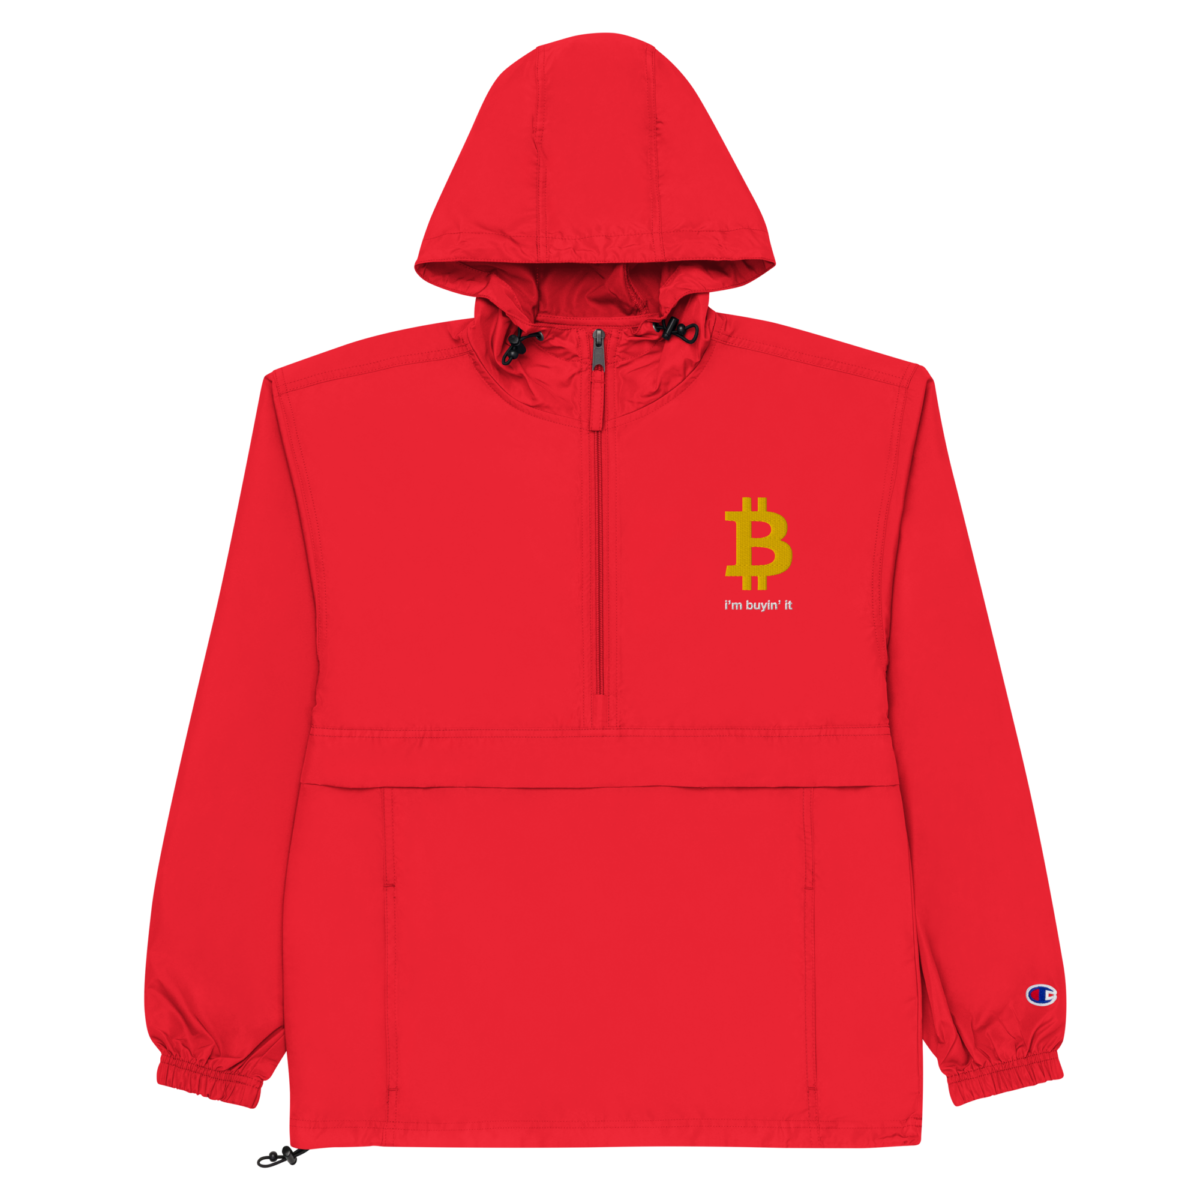 embroidered champion packable jacket scarlet front 631f42af17de6 - Bitcoin: I'm Buyin' It Champion Packable Jacket